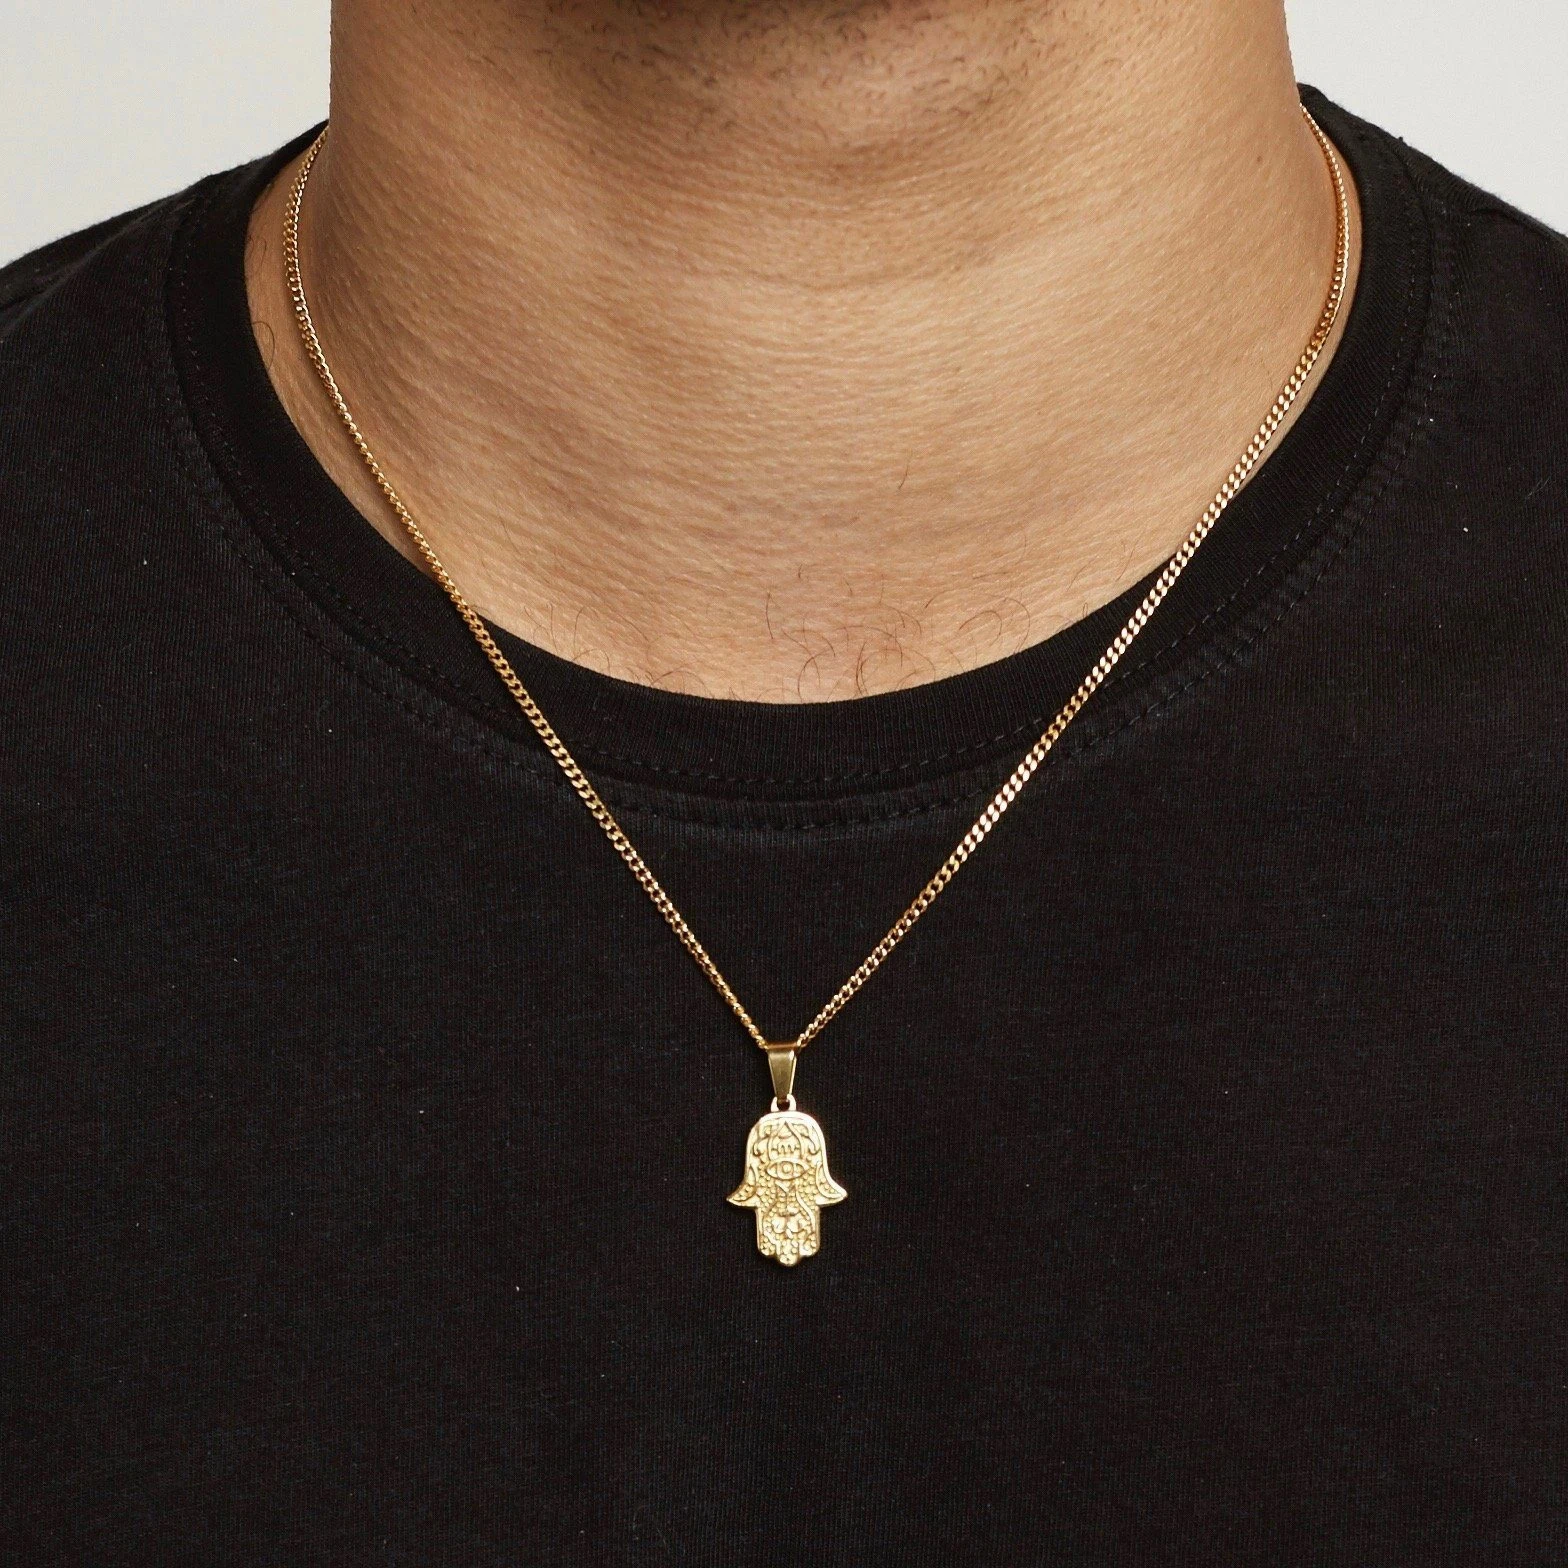 Gemnel Pvd Jewelry Stainless Steel Hamsa Hand Pendant Gold Necklace Men ...